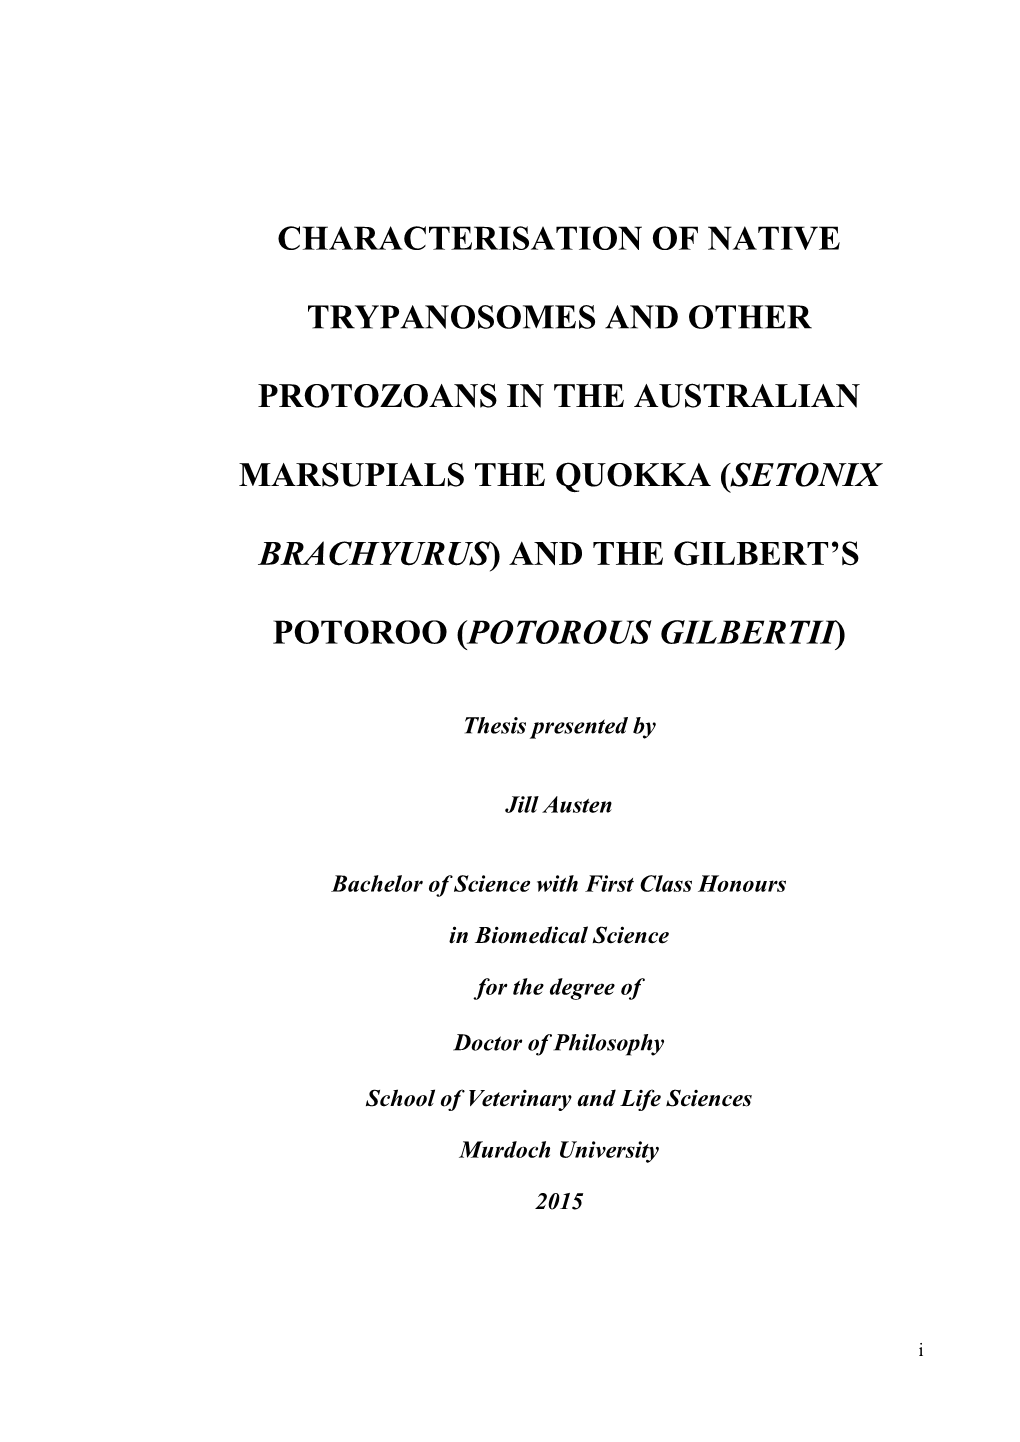 Characterisation of Native